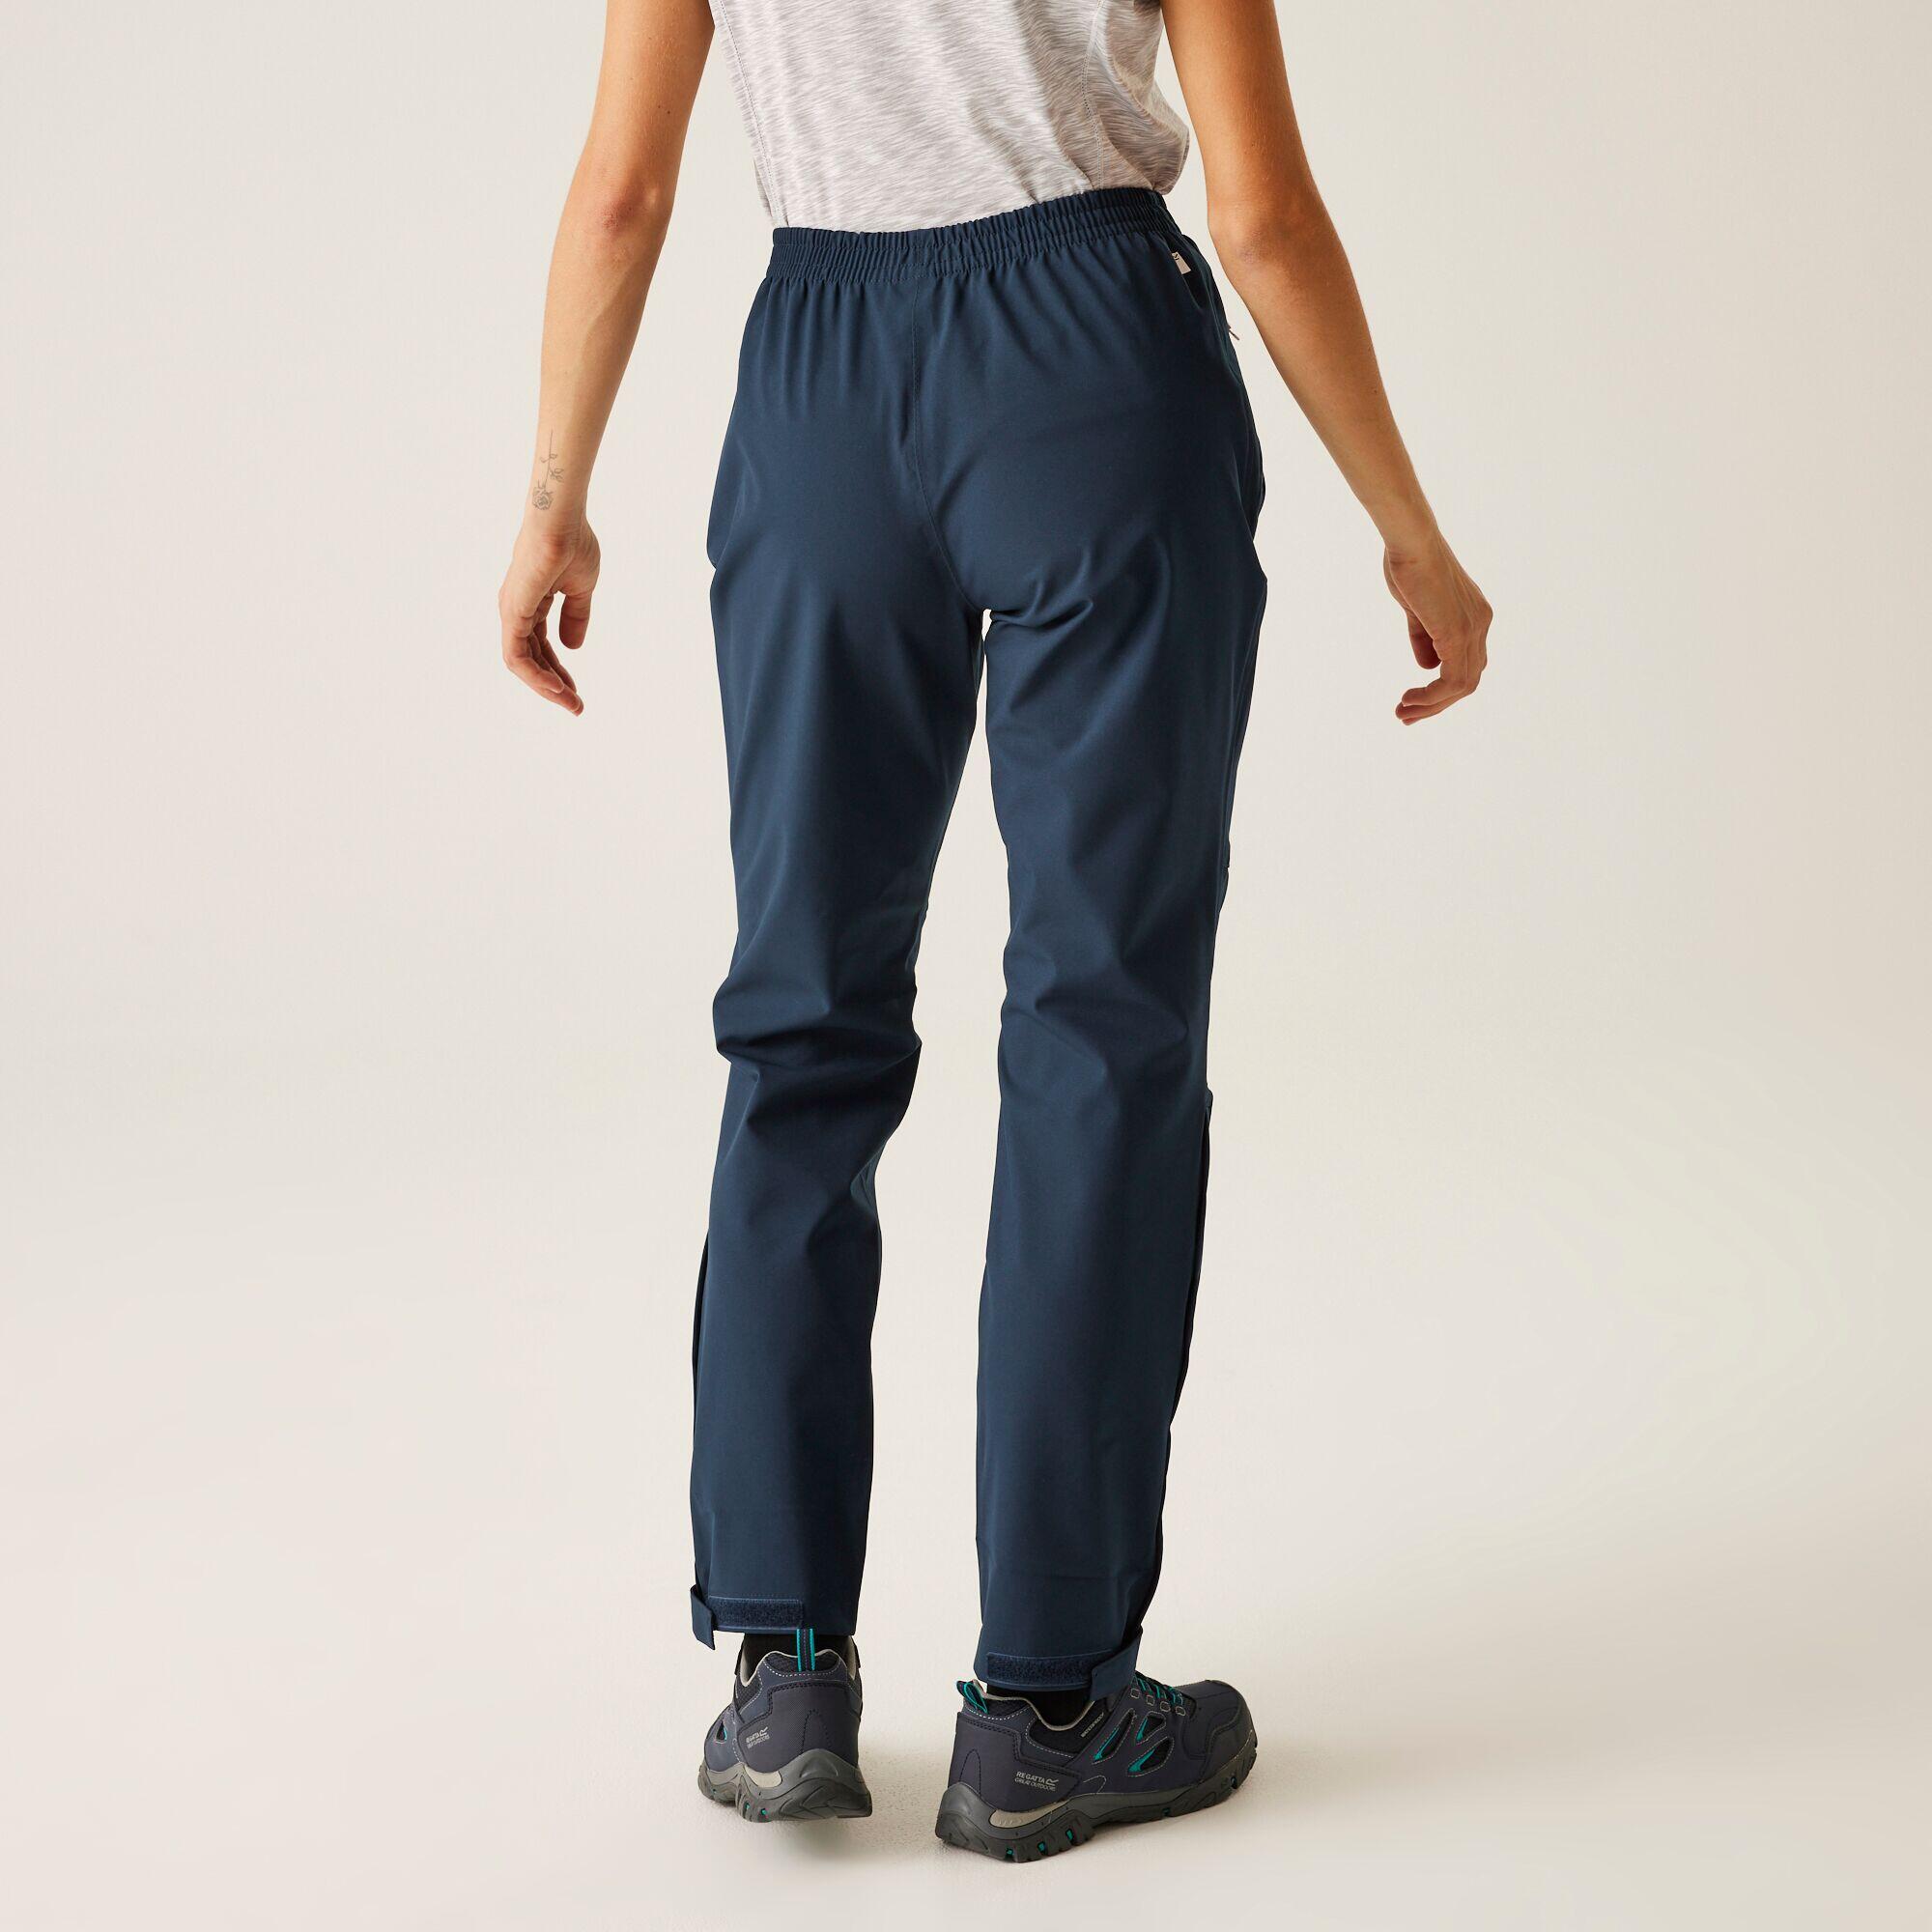 Highton Stretch Women's Hiking Overtrousers - Navy 2/5